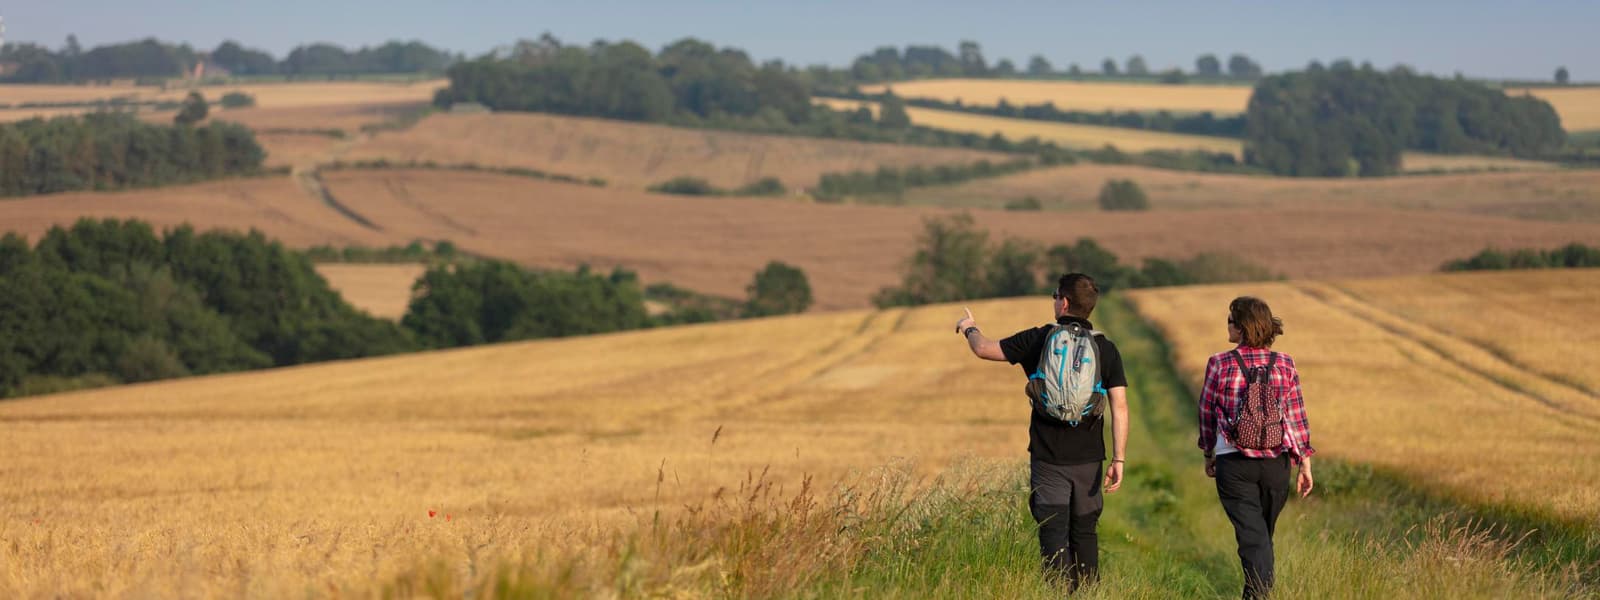 Lincolnshire NL - Wold Hike (c) Love Lincs Wolds